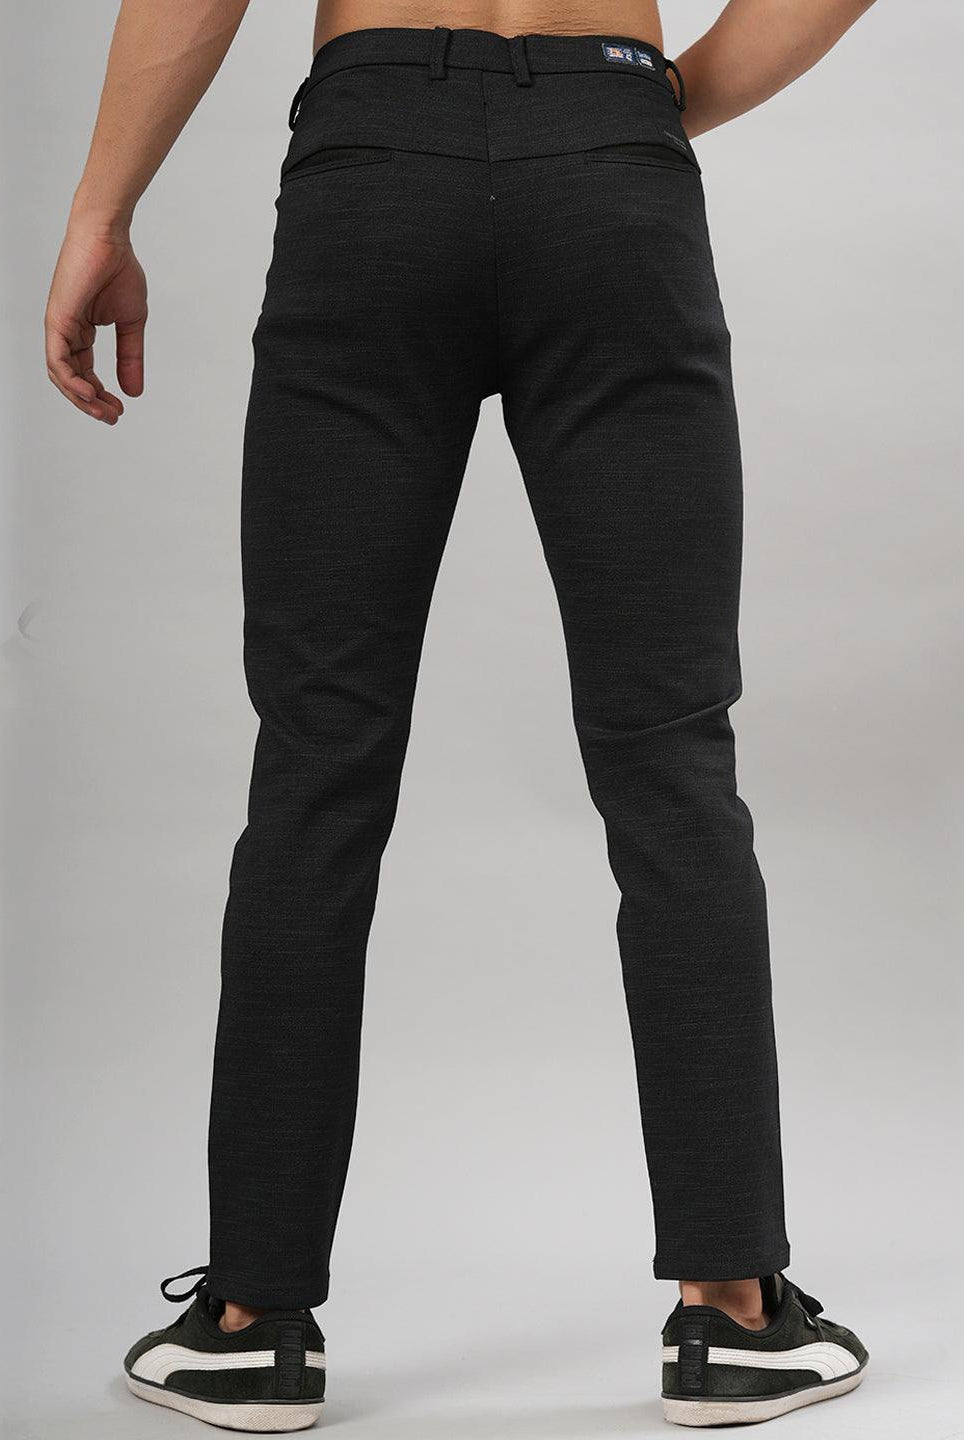 Solid Black Distressed Cotton Pant - Tistabene